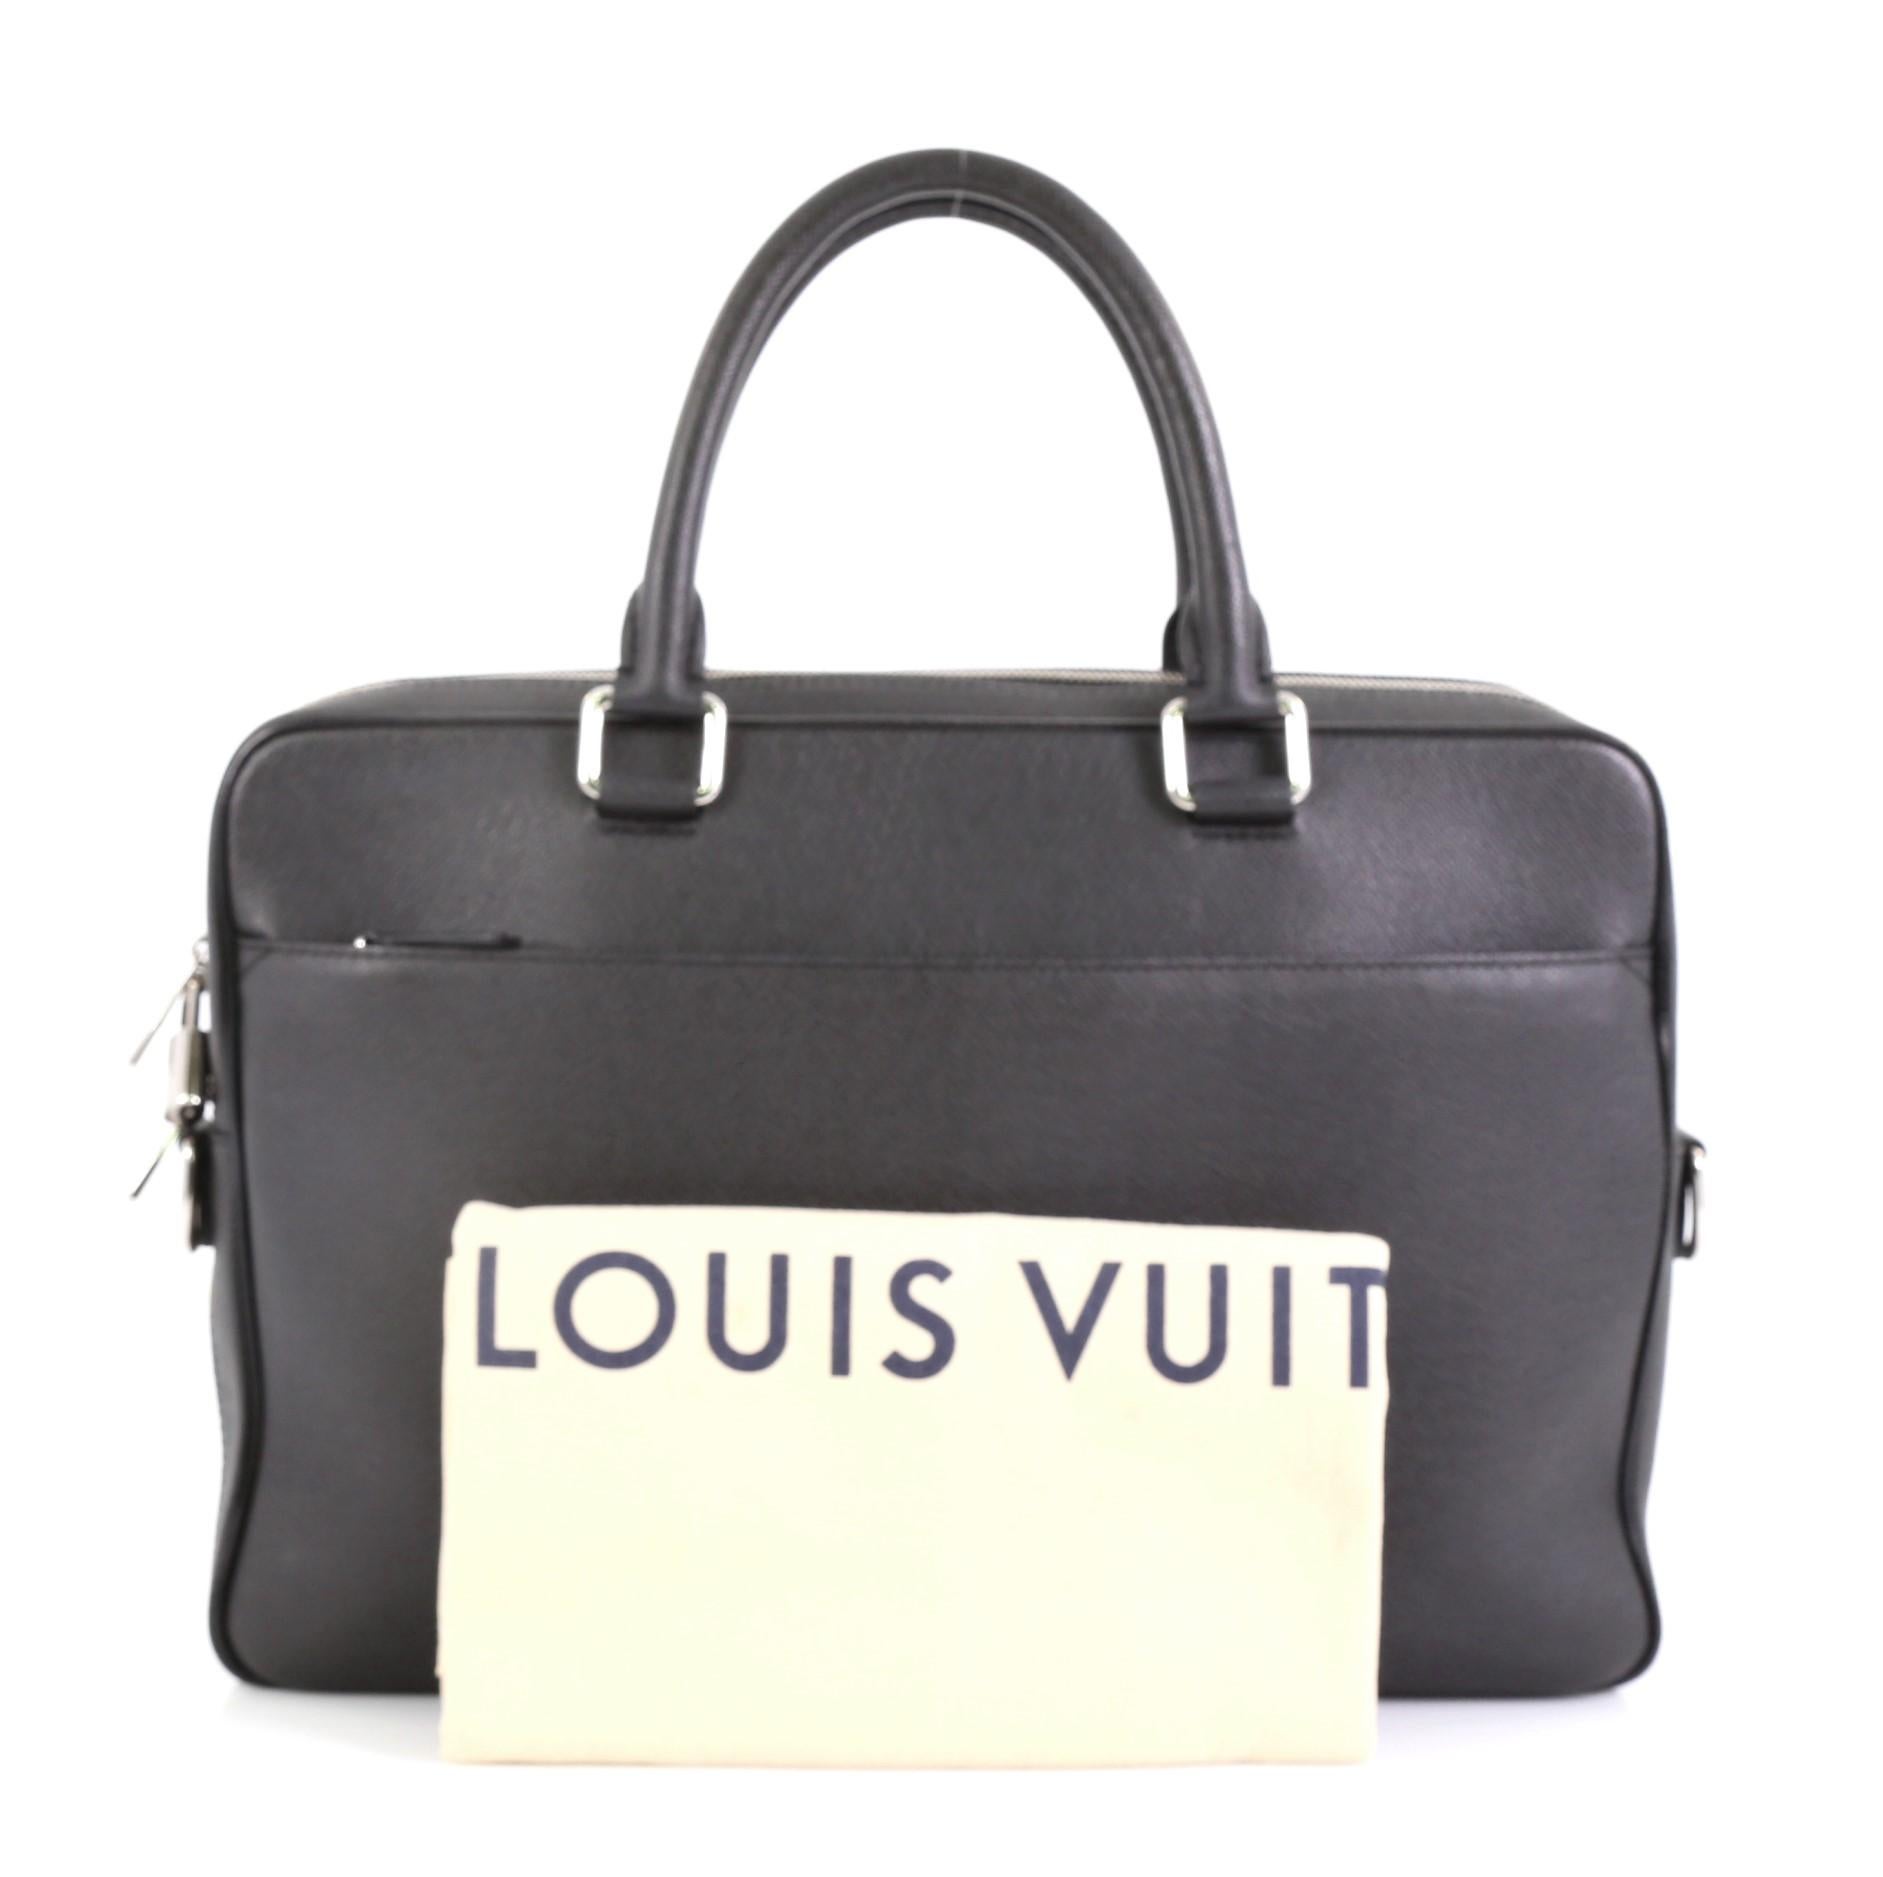 This Louis Vuitton Porte-Documents Business Bag Taiga Leather PM, crafted from black taiga leather, features dual rolled leather handles and silver-tone hardware. Its two-way zip closure opens to a black fabric interior with multiple slip pockets.